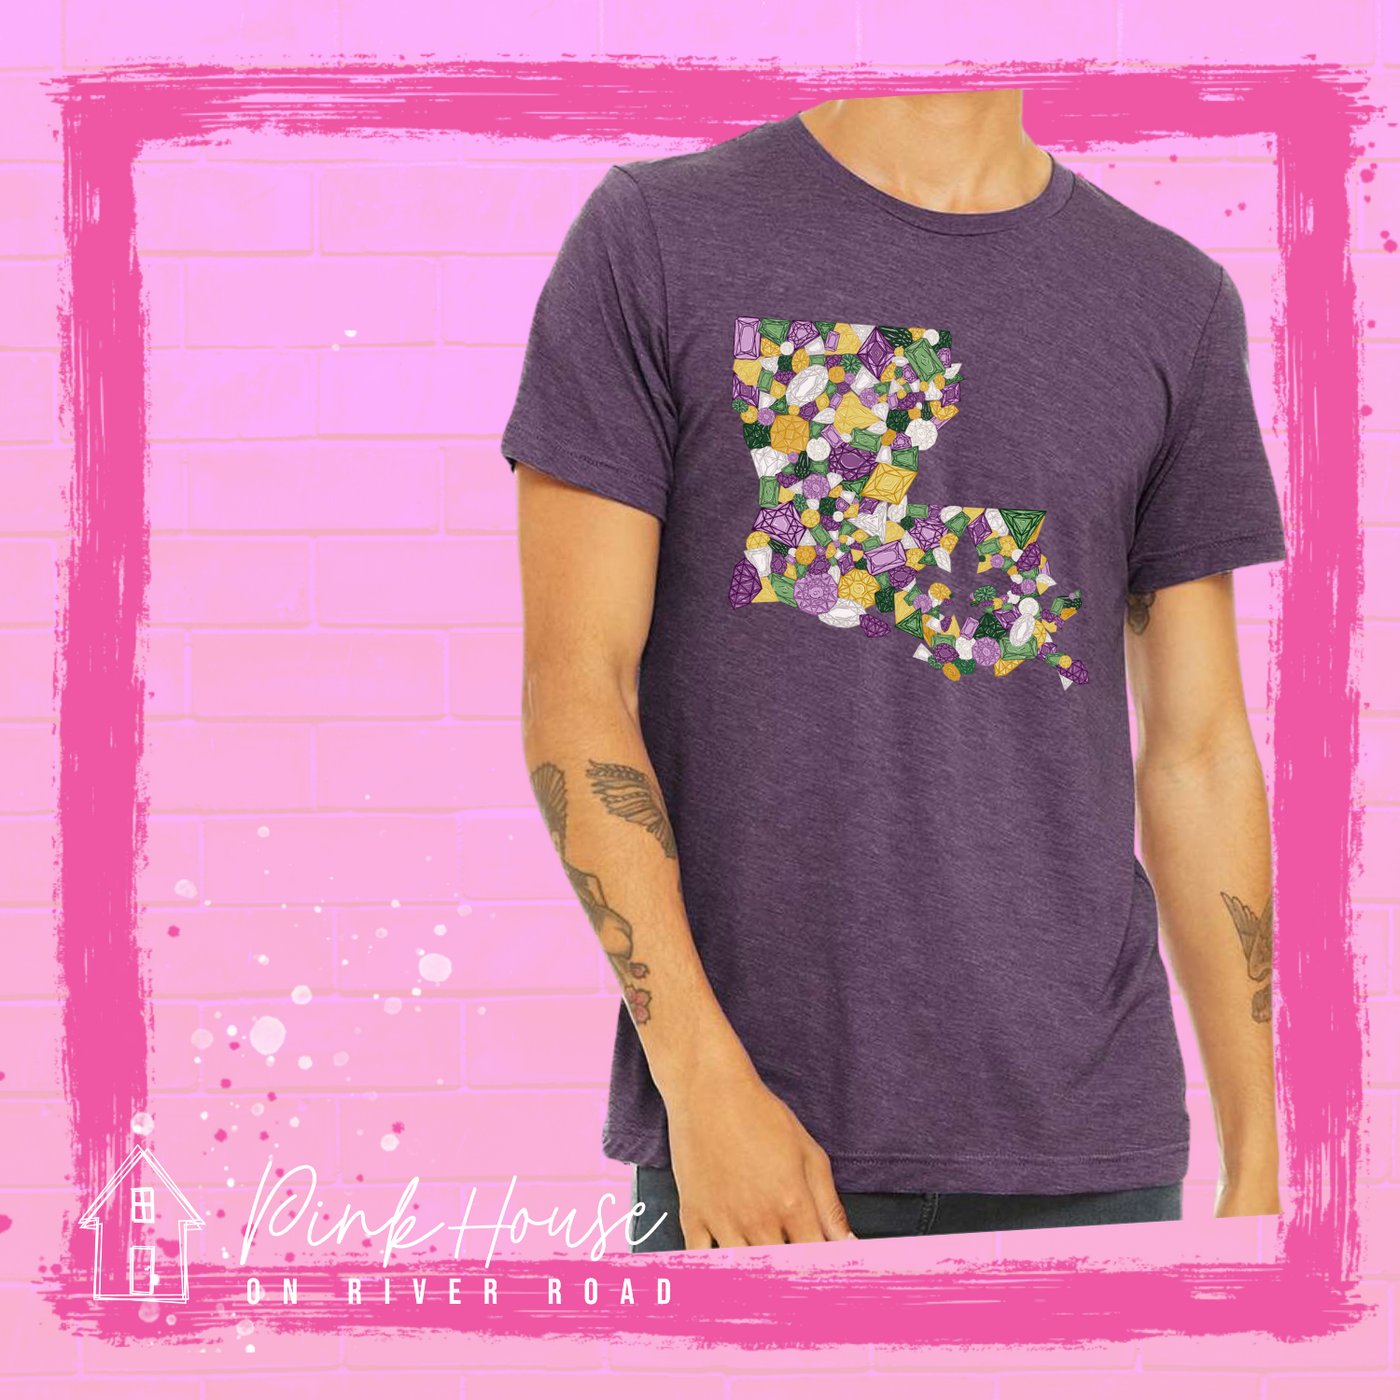 Heathered dark purple tee with a graphic of the state of Louisiana compromised of different shapes and sizes of purple, green, yellow and clear jewels.